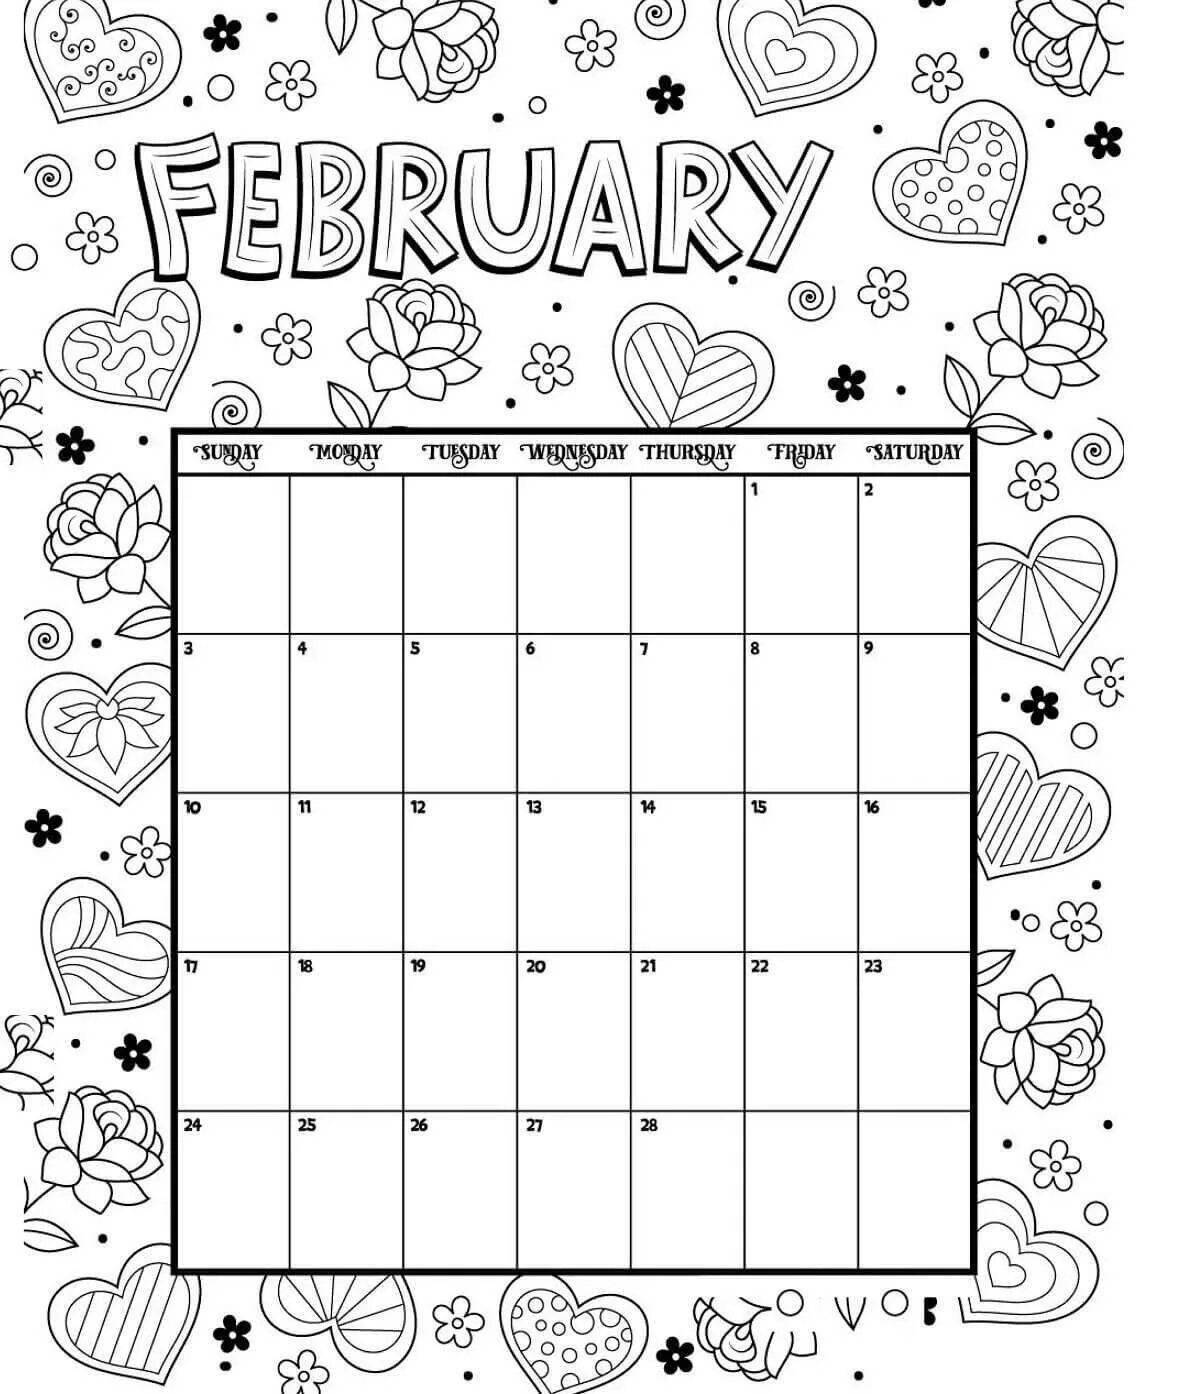 Coloring book sparkling february